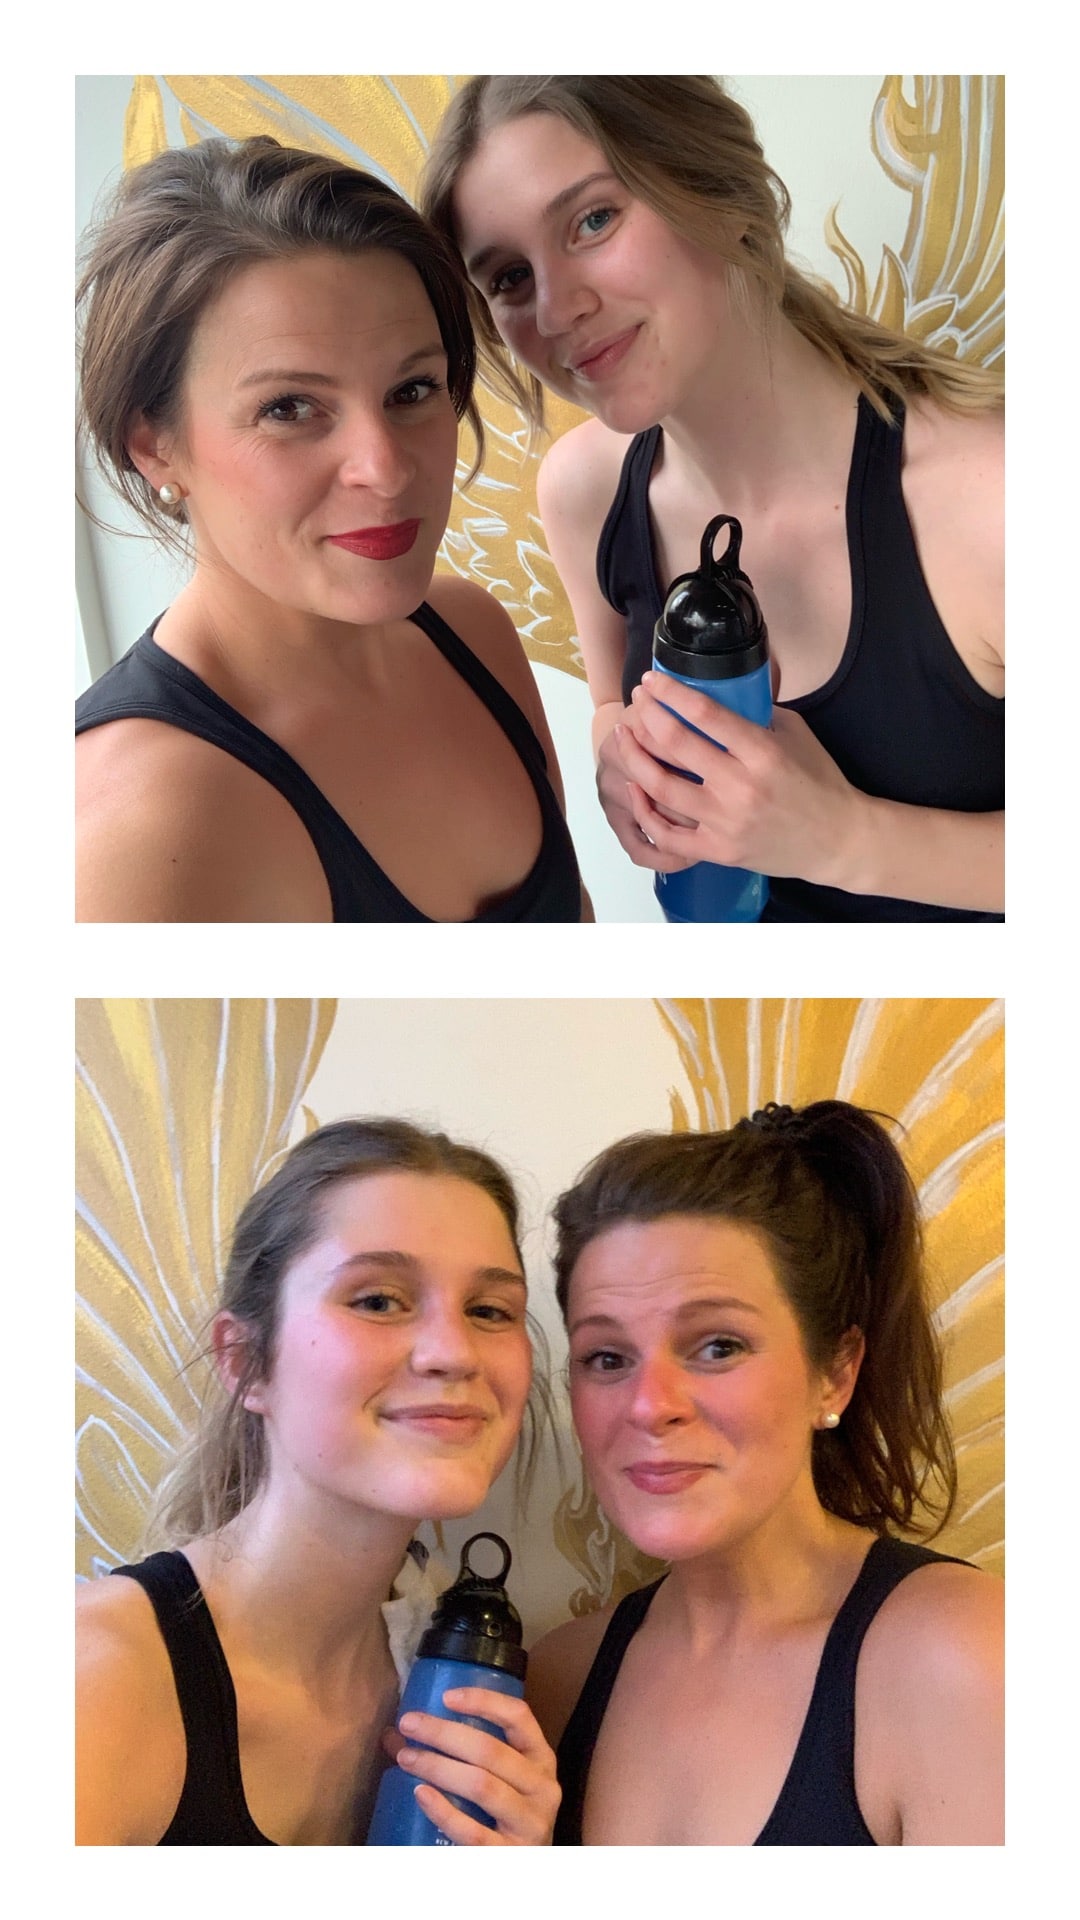 Our before and after shots from our first class. We left looking a mess but in a MUCH better mood! 